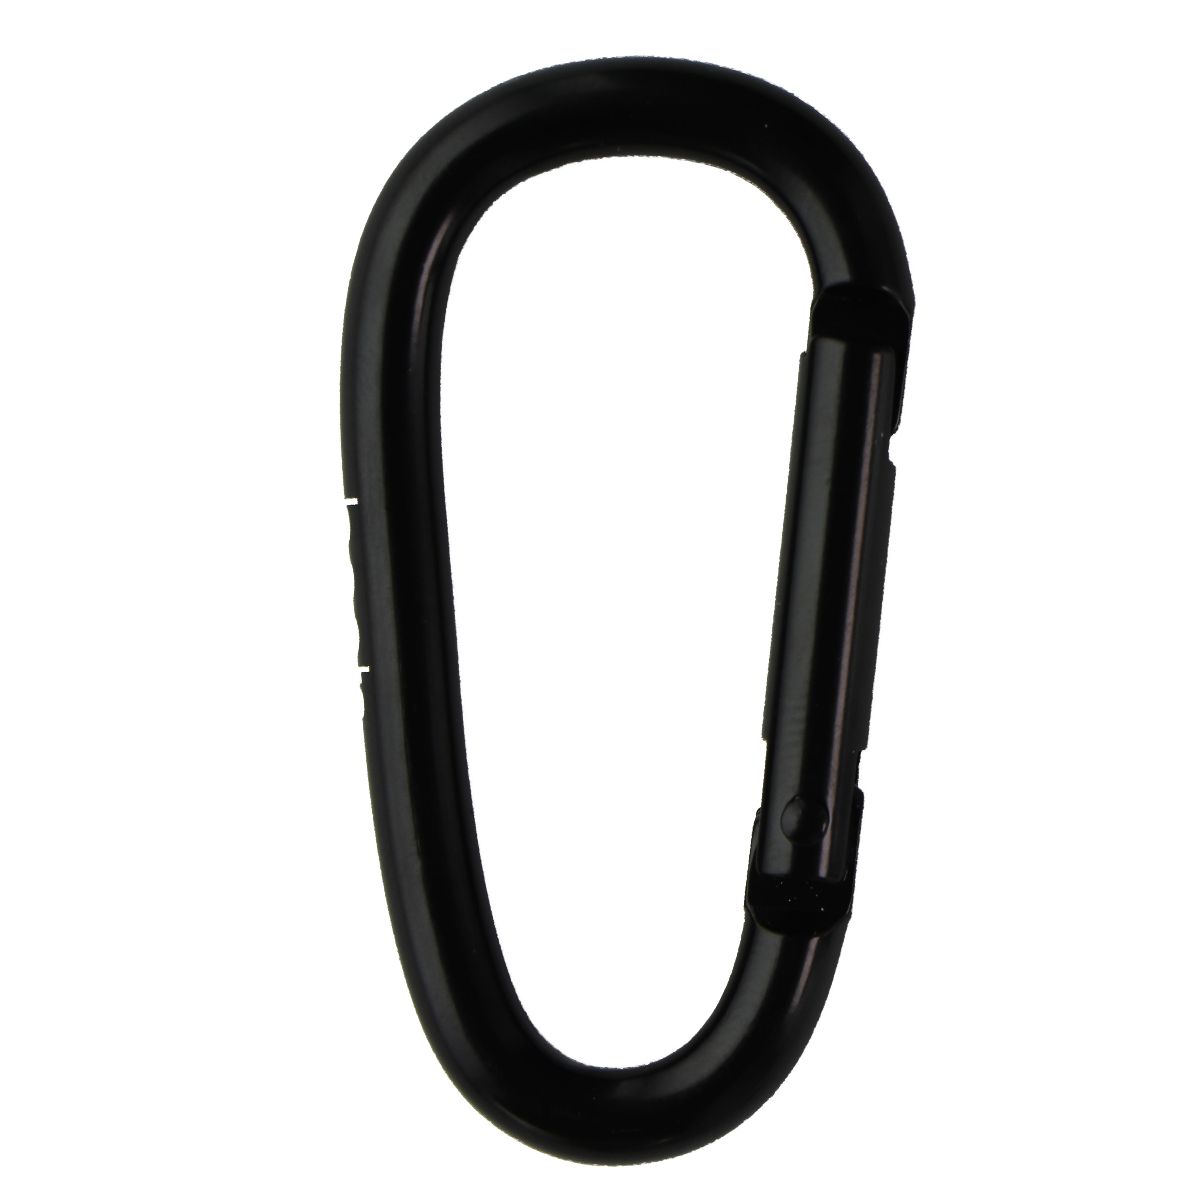 Beats by Dre OEM Carabiner Belt Hook D-ring Keychain - Black/White Logo Portable Audio - Headphones Beats by Dr. Dre    - Simple Cell Bulk Wholesale Pricing - USA Seller